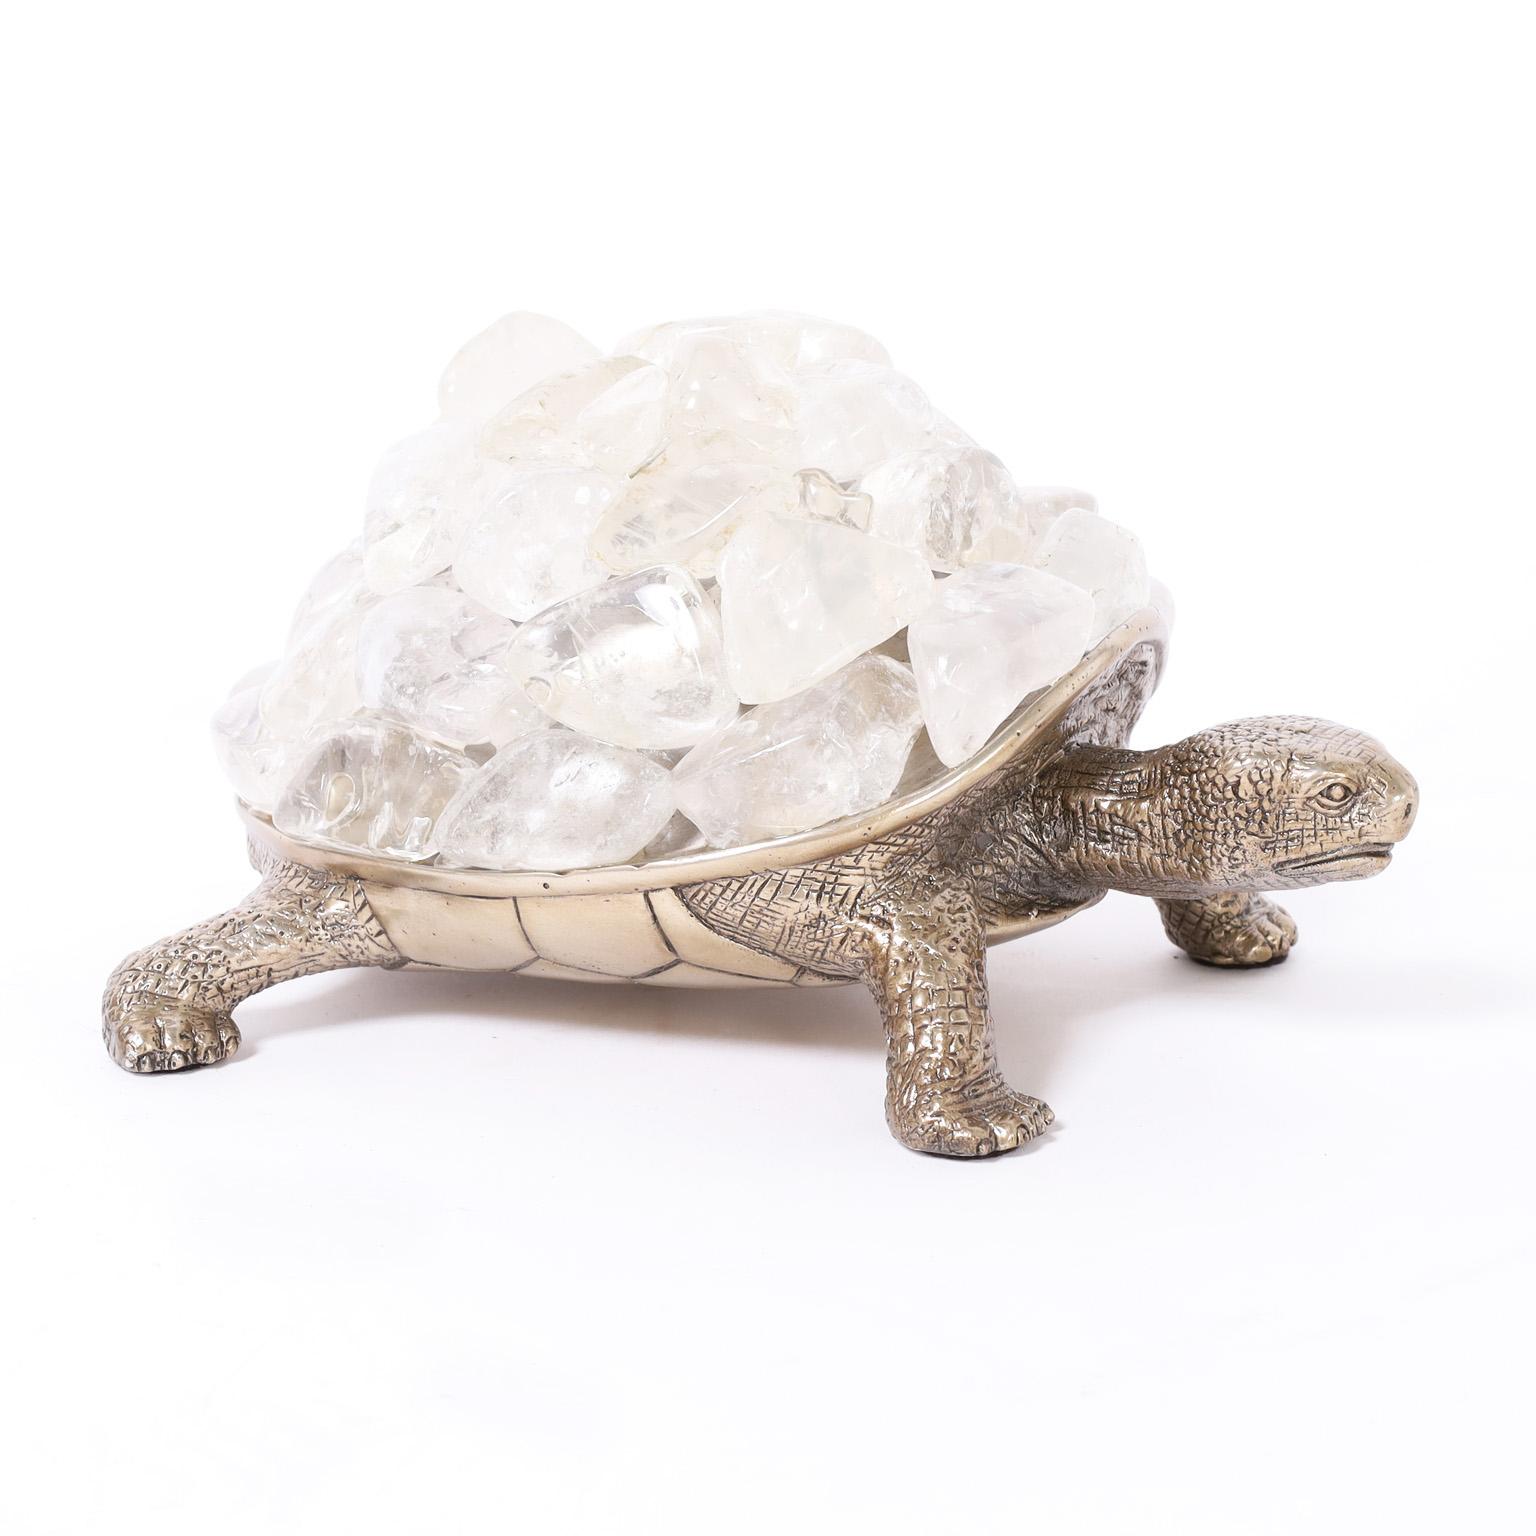 Victorian Silver Plate Turtle with Crystal Rocks For Sale